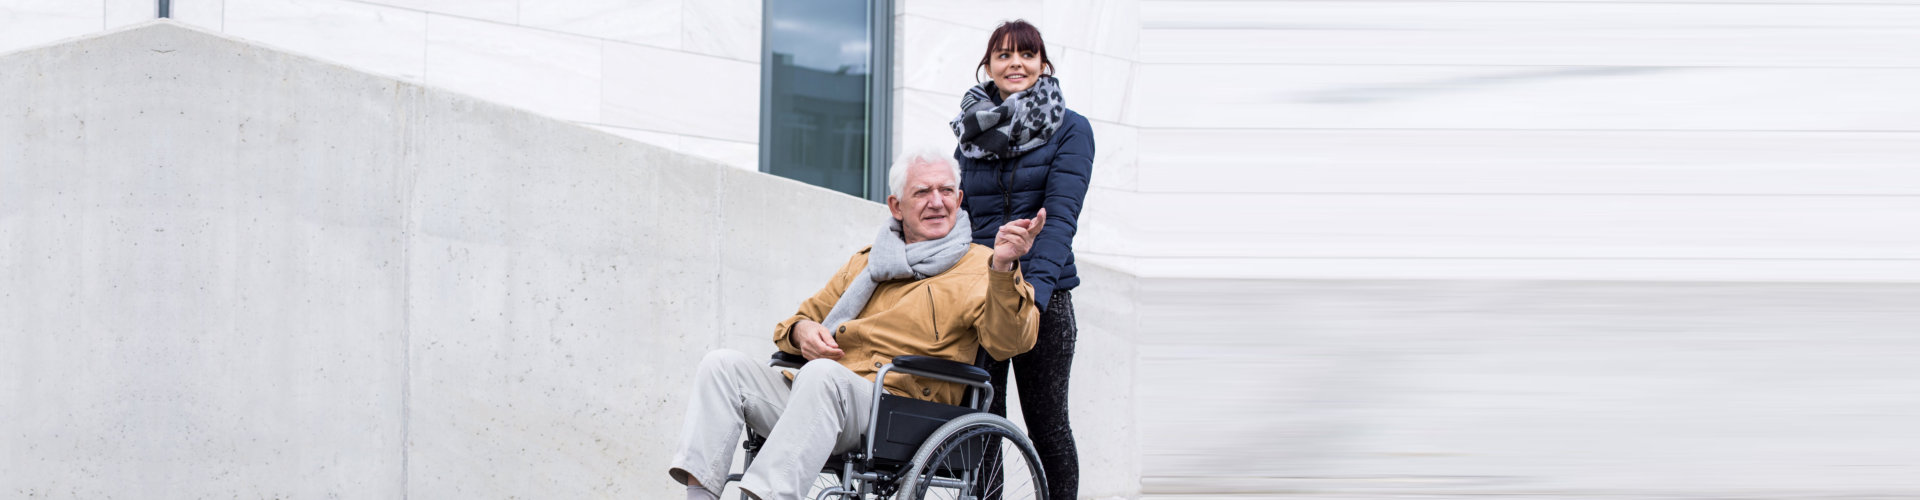 caregiver together with senior man on wheelchair